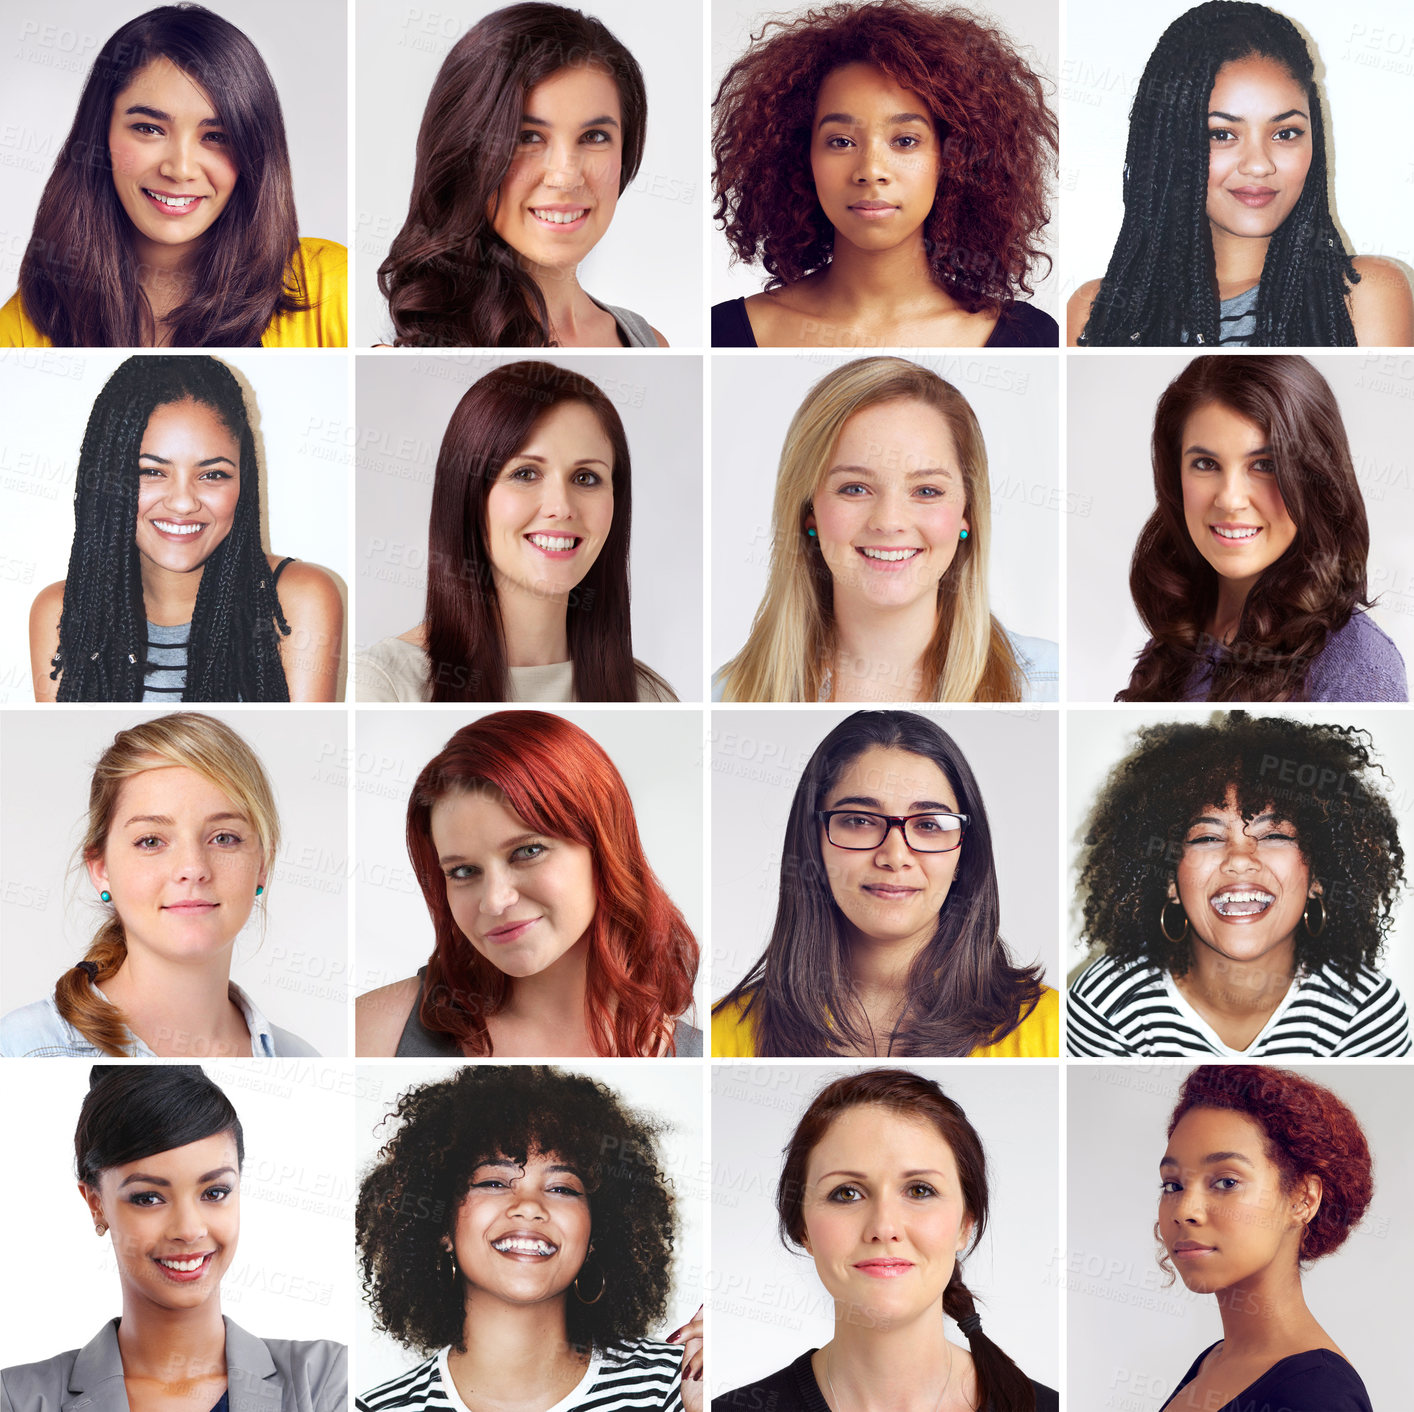 Buy stock photo Composite image of a diverse group of smiling women